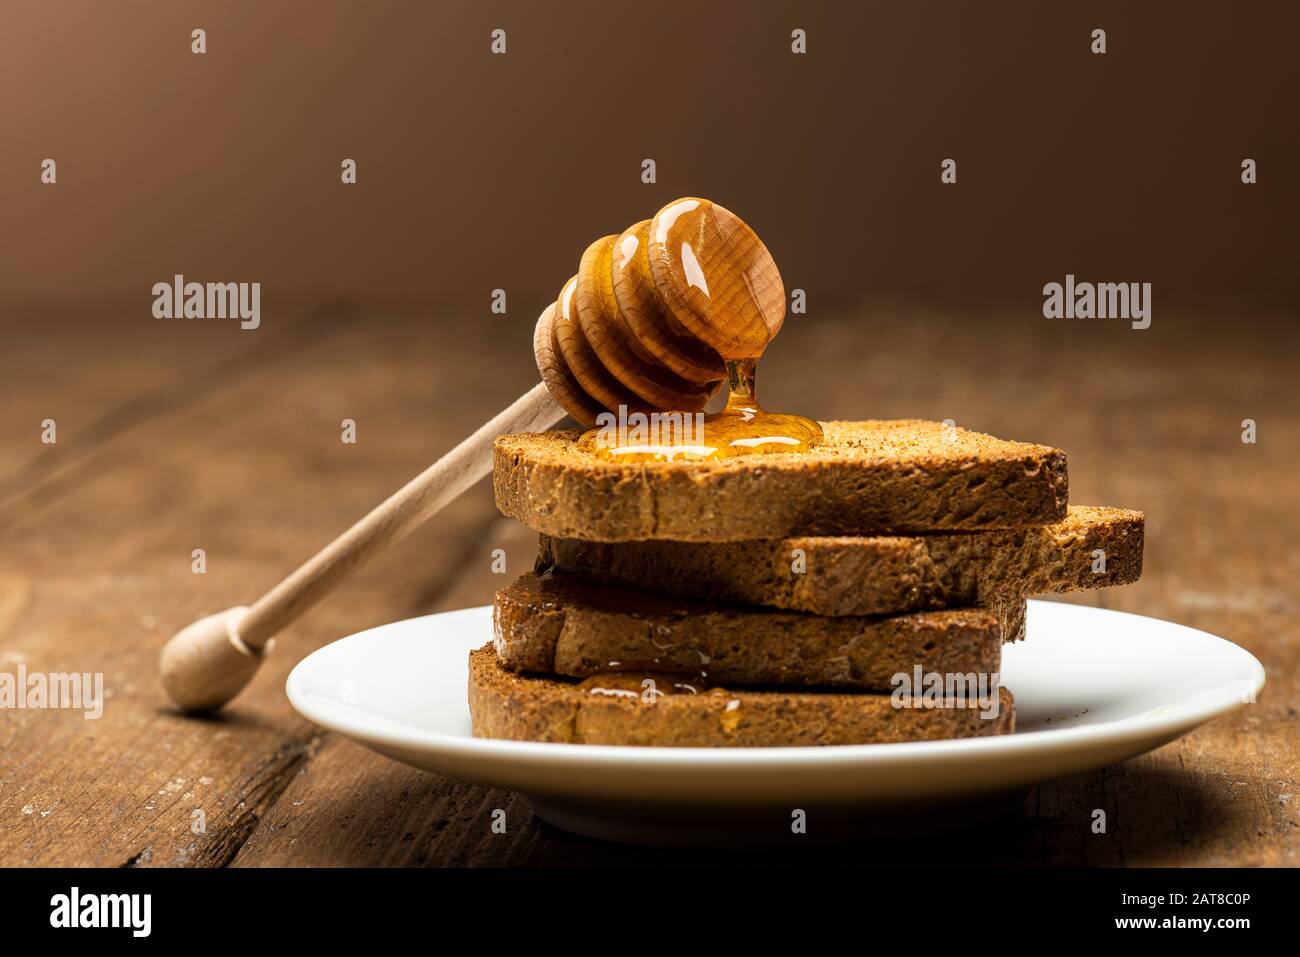 Honey dipper resting on some wholemeal rusks on table. Stock Photo